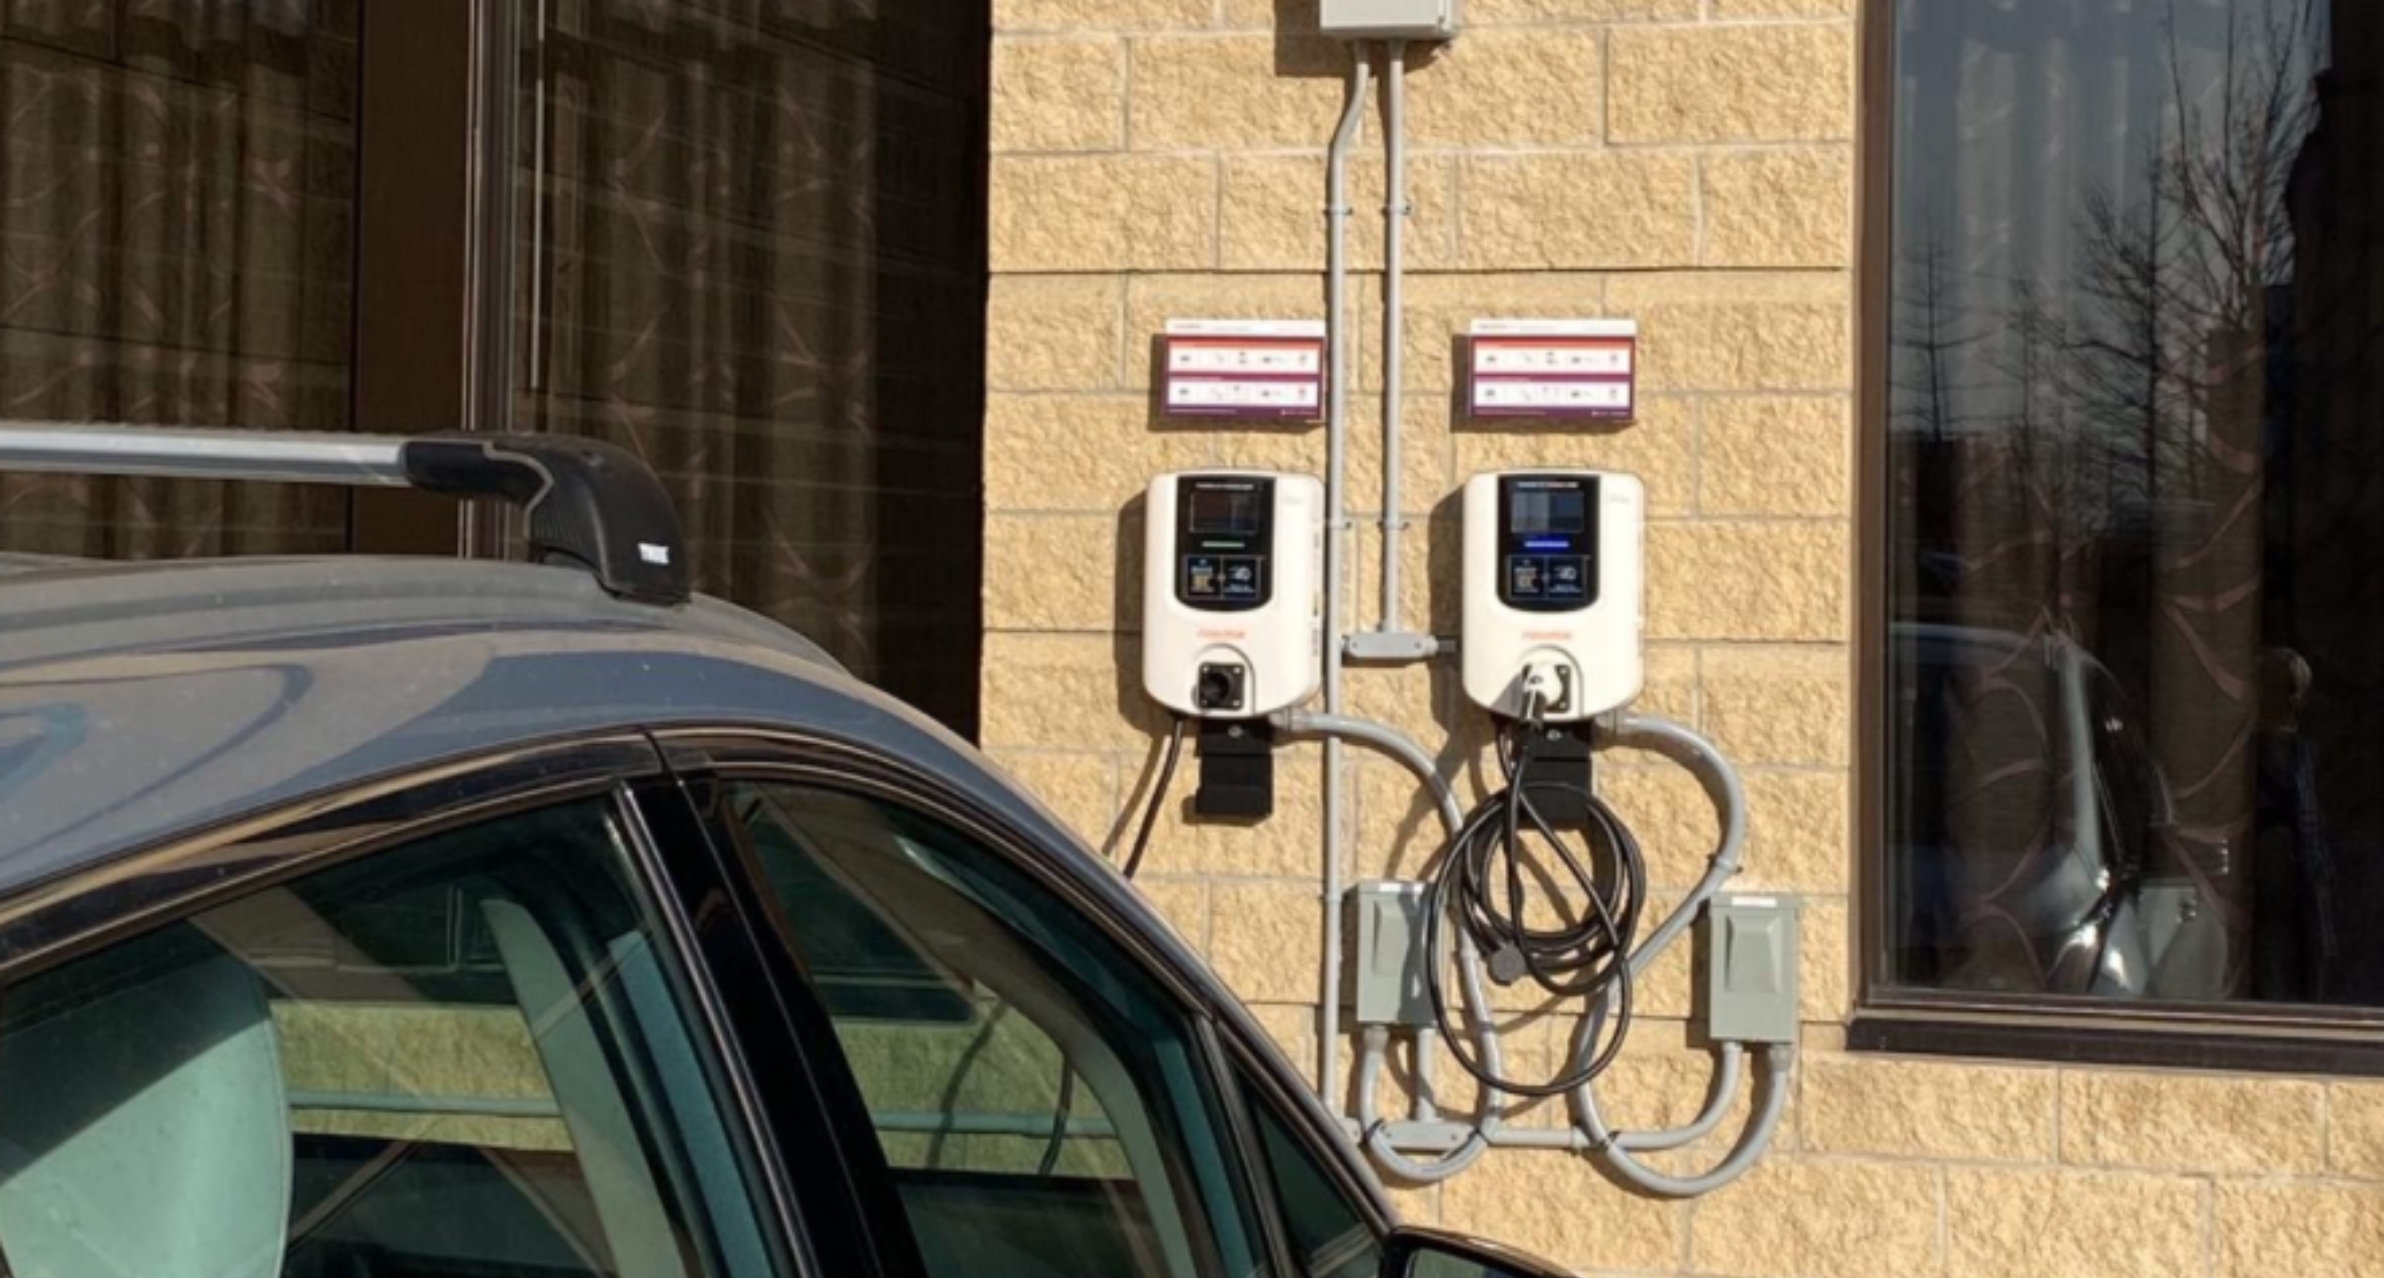 PR - Noodoe EV Expands Partnership with Green Dot Group in Canada - Technology Partnership Continues To Electrify North America EV Market - ev charging partnerships